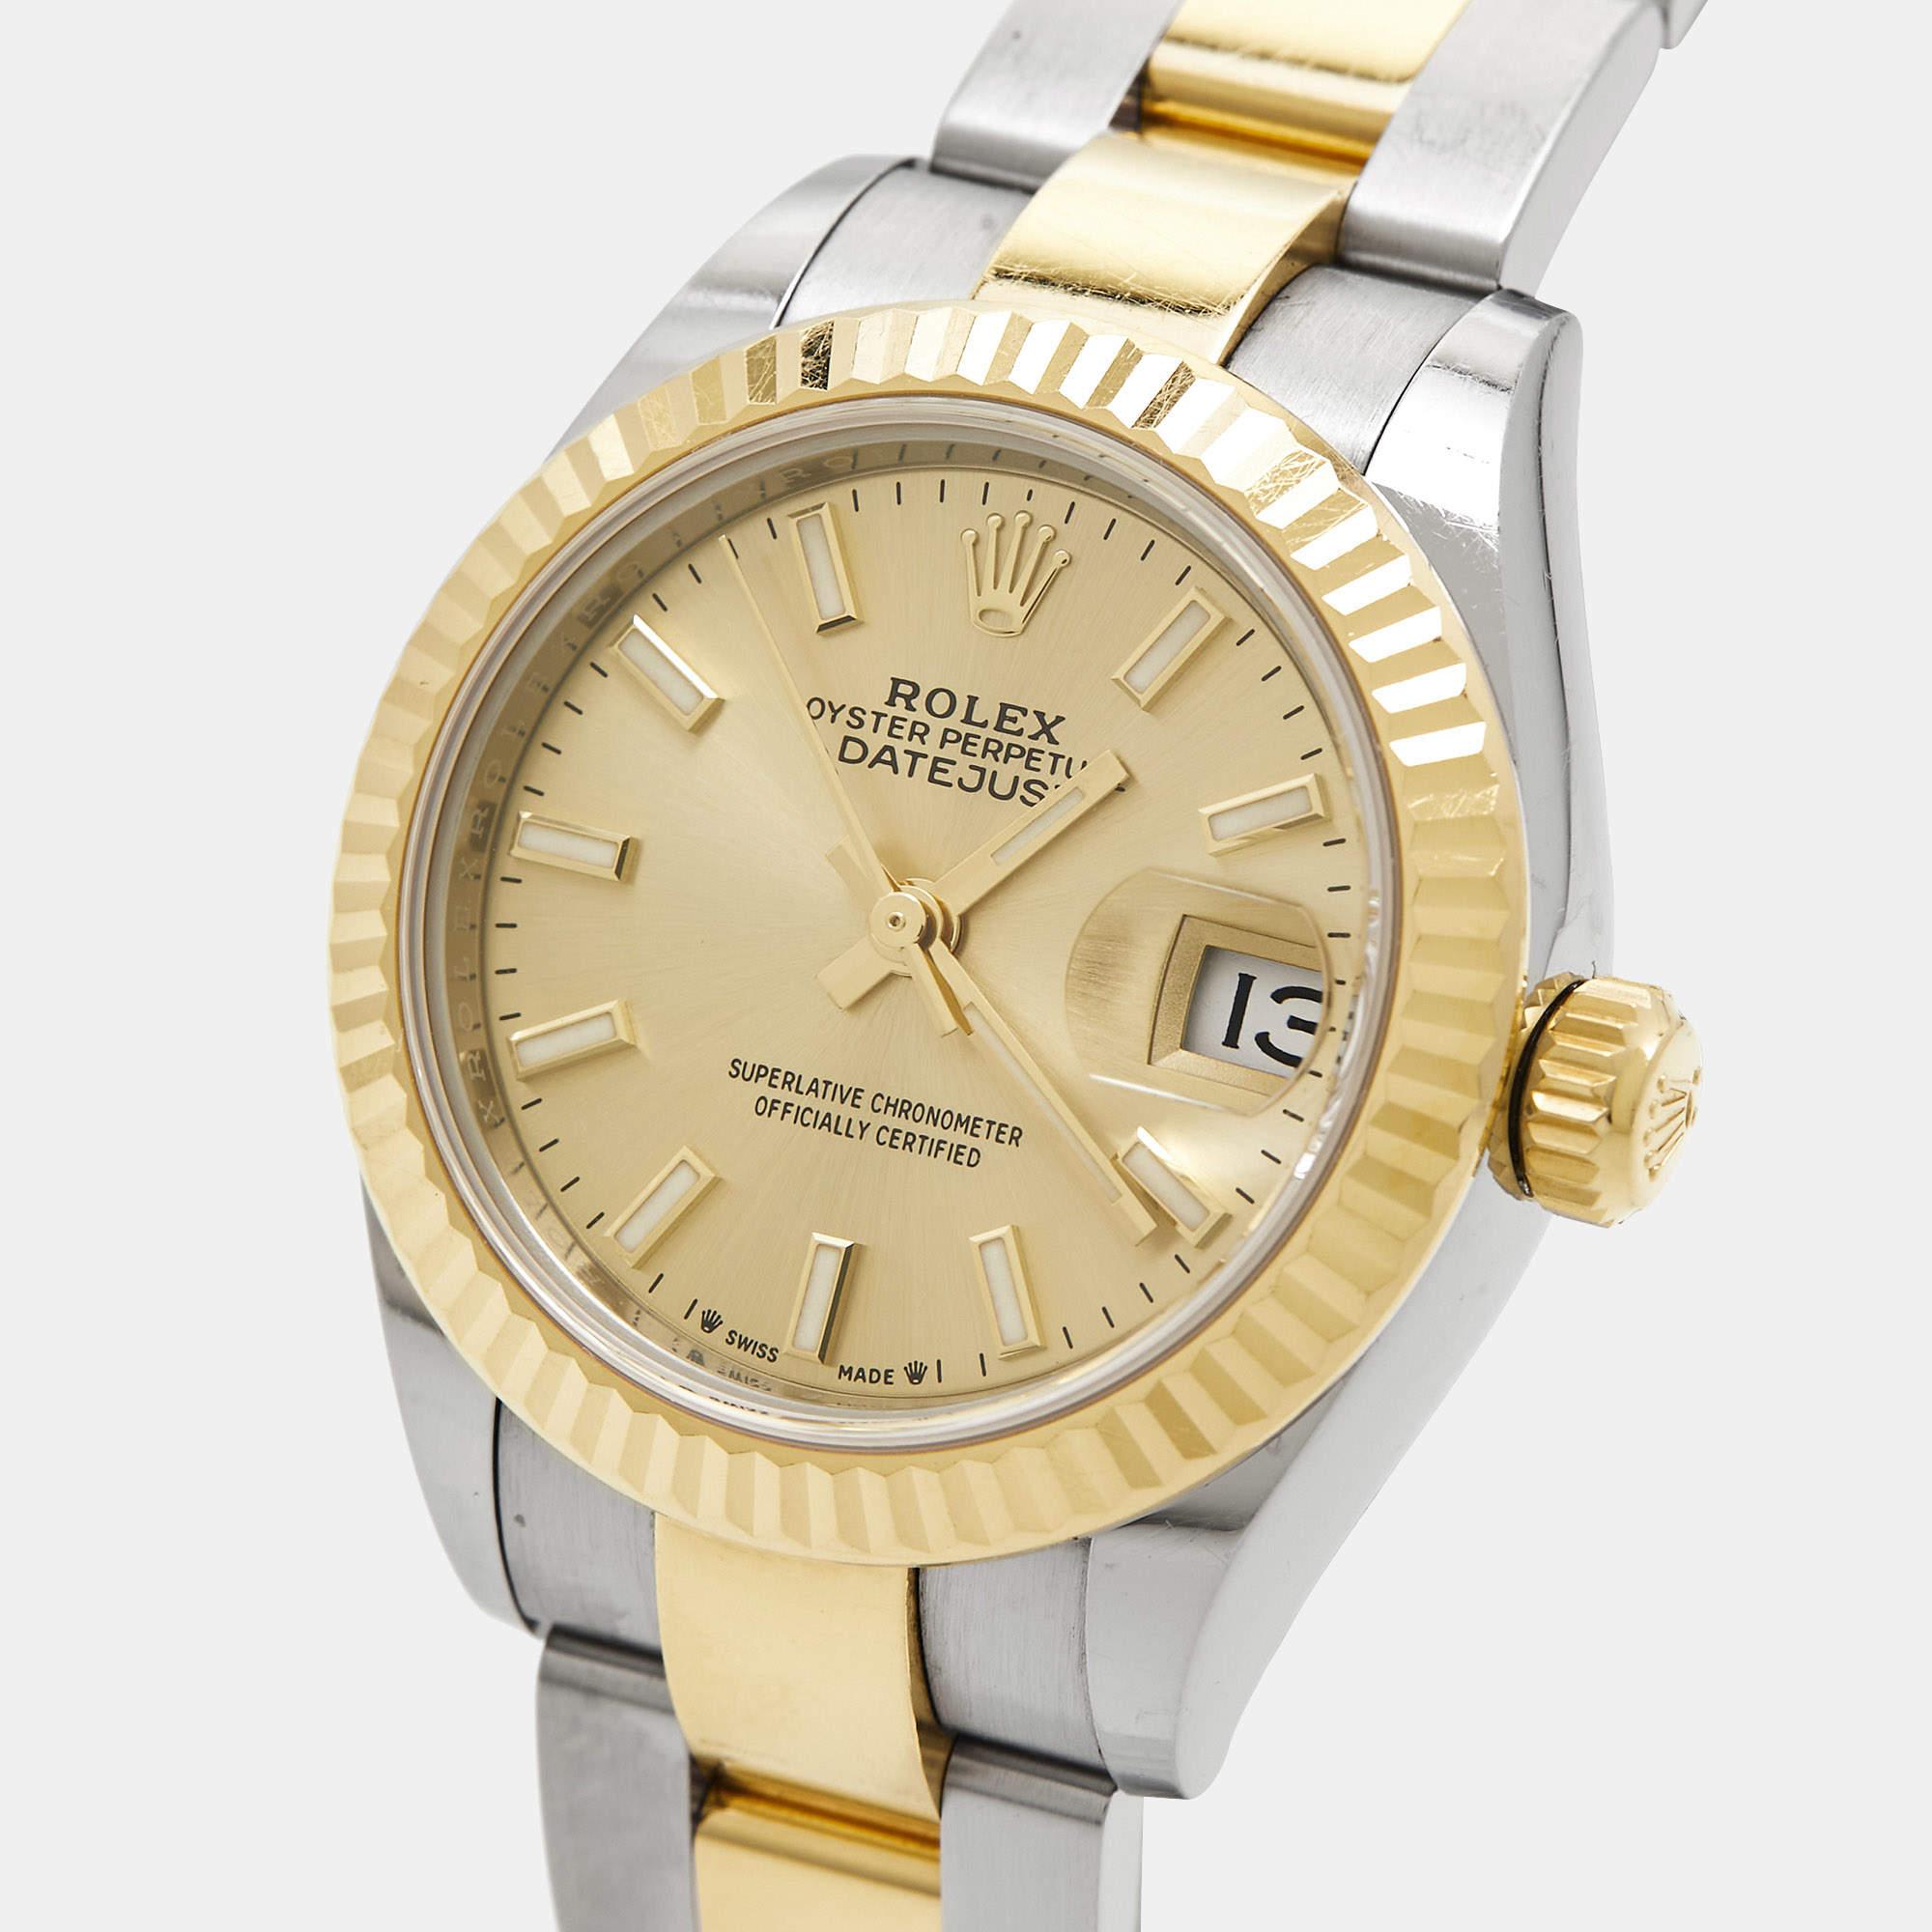 This beautiful Rolex Datejust for women will be a fine investment. Crafted using stainless steel and 18k yellow gold, the automatic watch features a champagne dial set with index hour markers, a date window, and three hands. Iconic, comfortable, and